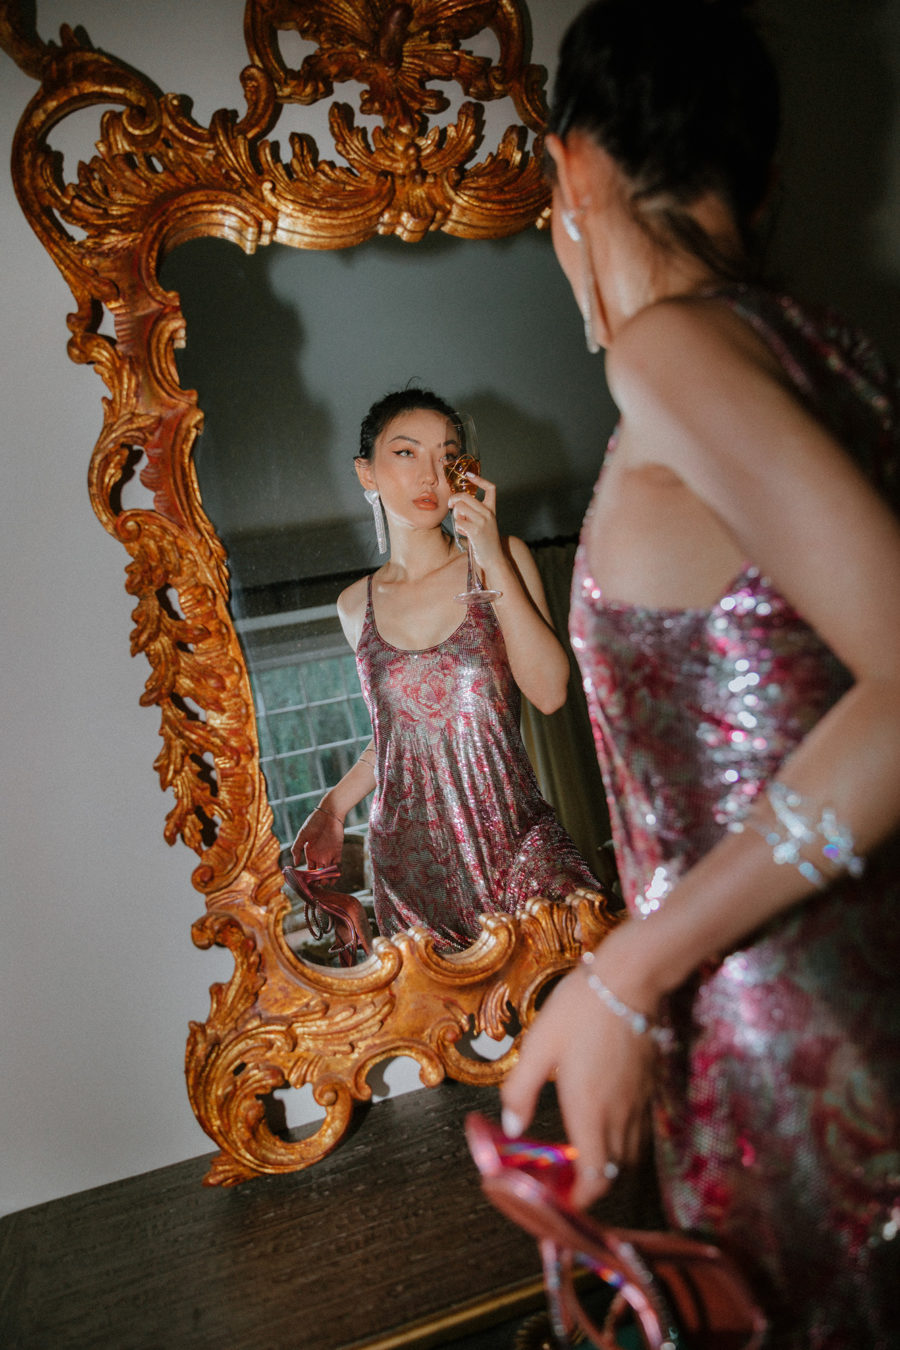 fashion blogger jessica wang wearing a sequin dress with crystal drop earrings and sharing her favorite fashion items // Jessica Wang - Notjessfashion.com